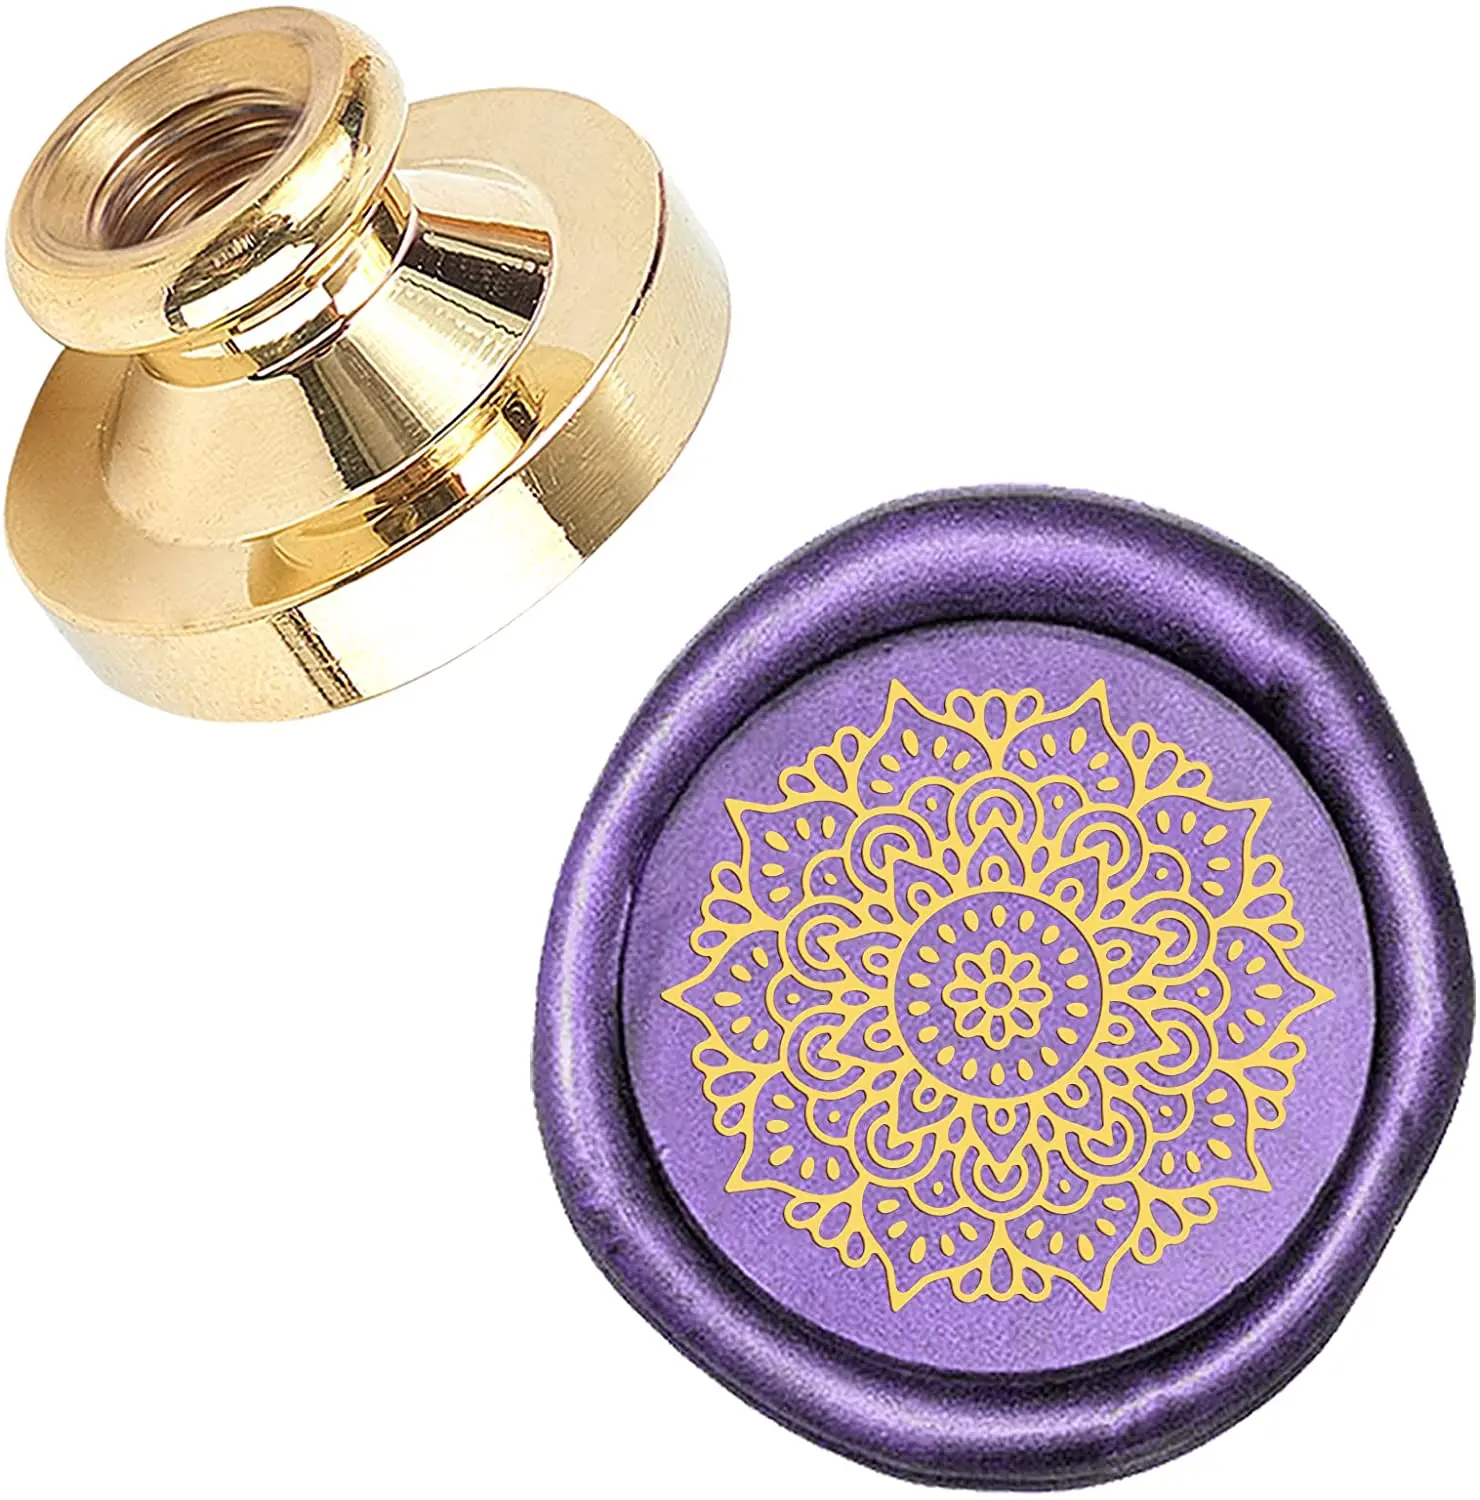 

Wax Seal Stamp Head 0.98" Flower Mandala Pattern Removable Retro Brass Sealing Stamp Head for Envelopes, Greeting Cards, Crafts